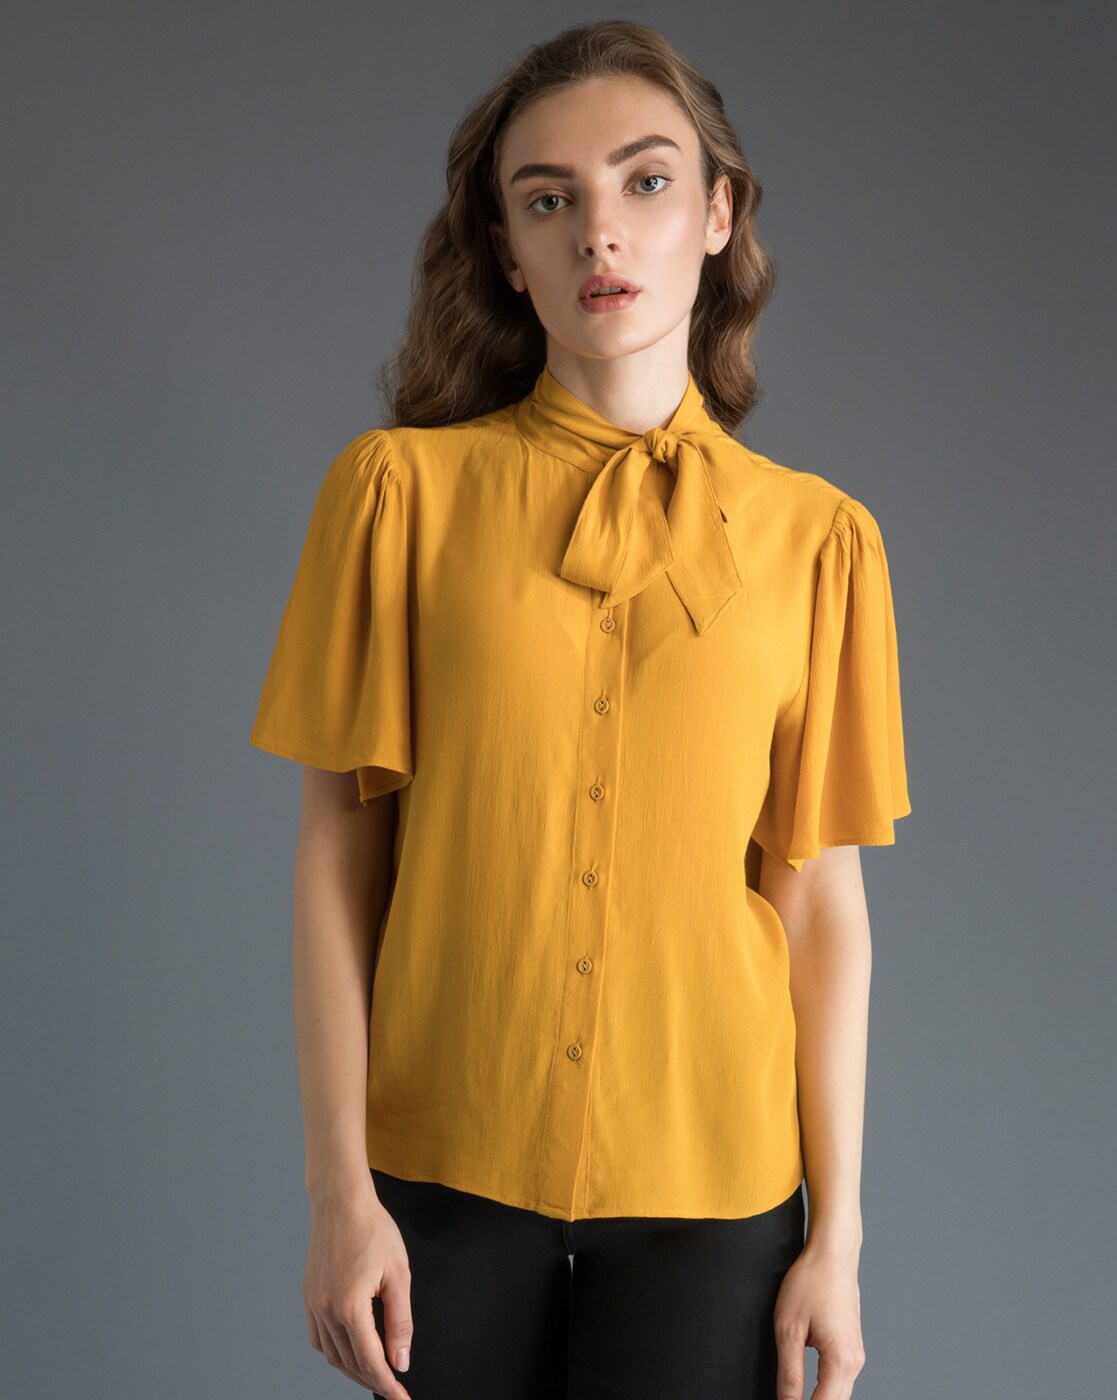 cover story yellow top